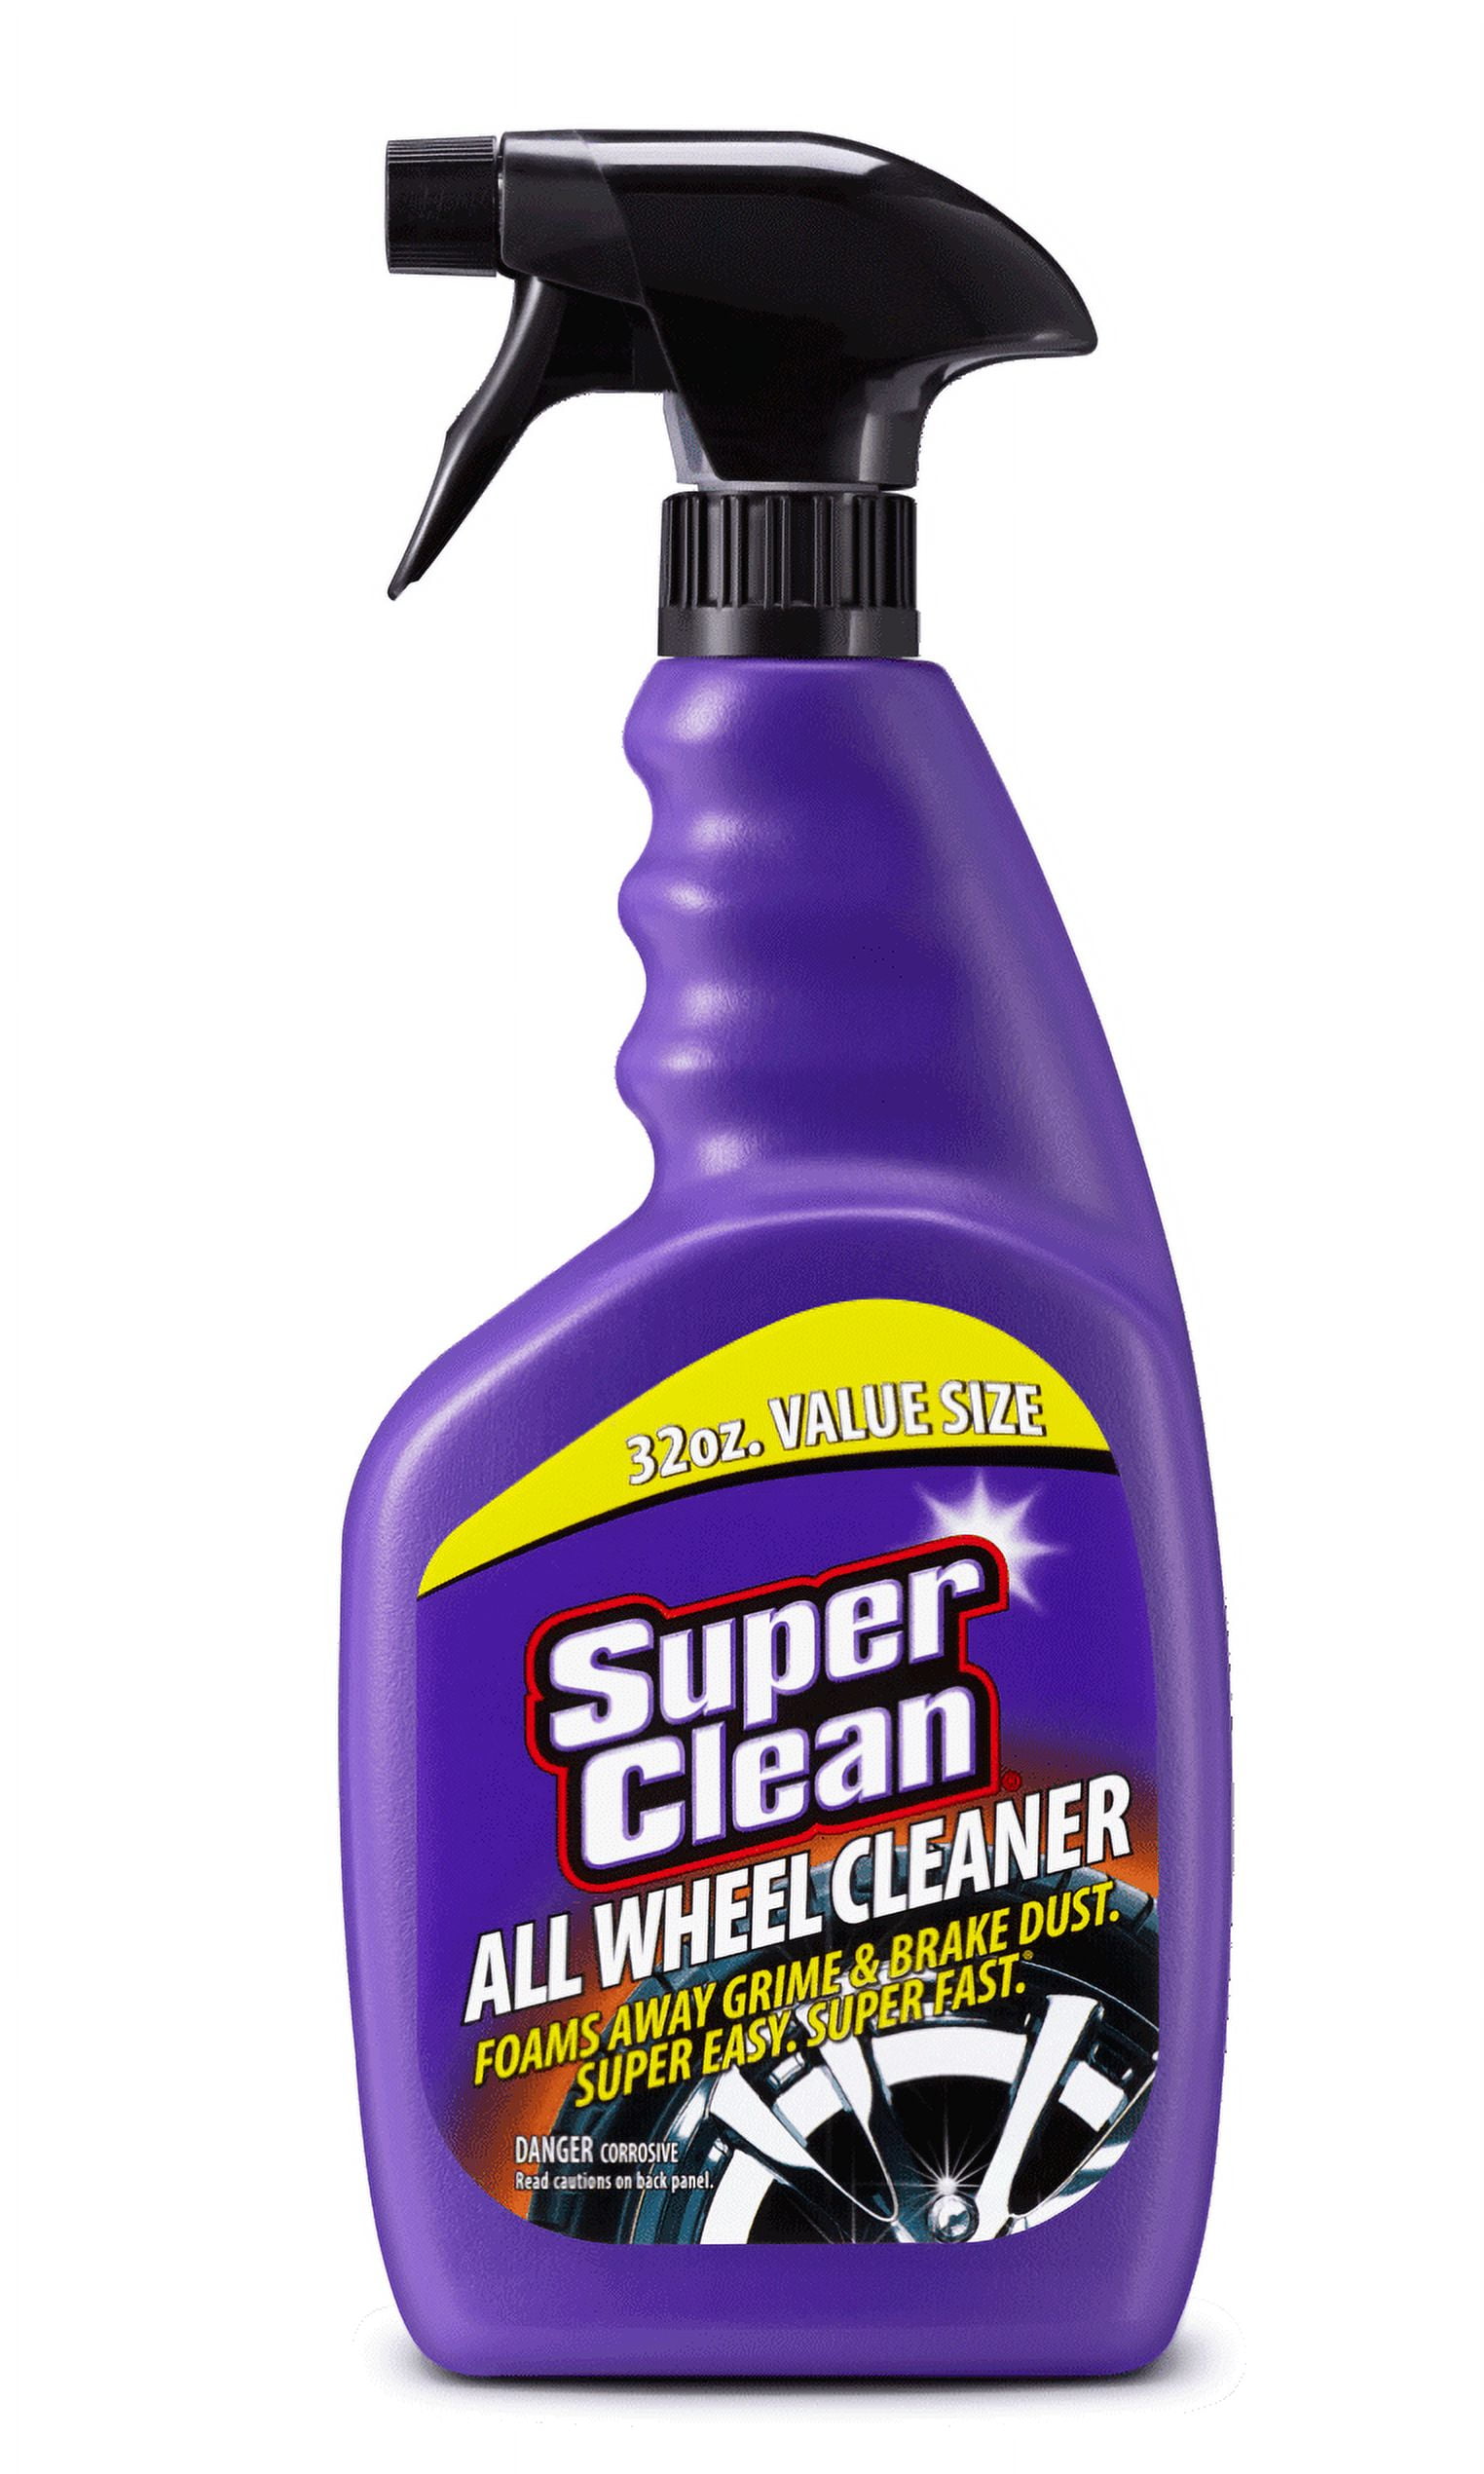 What Wheel Cleaner Is Best For You? 